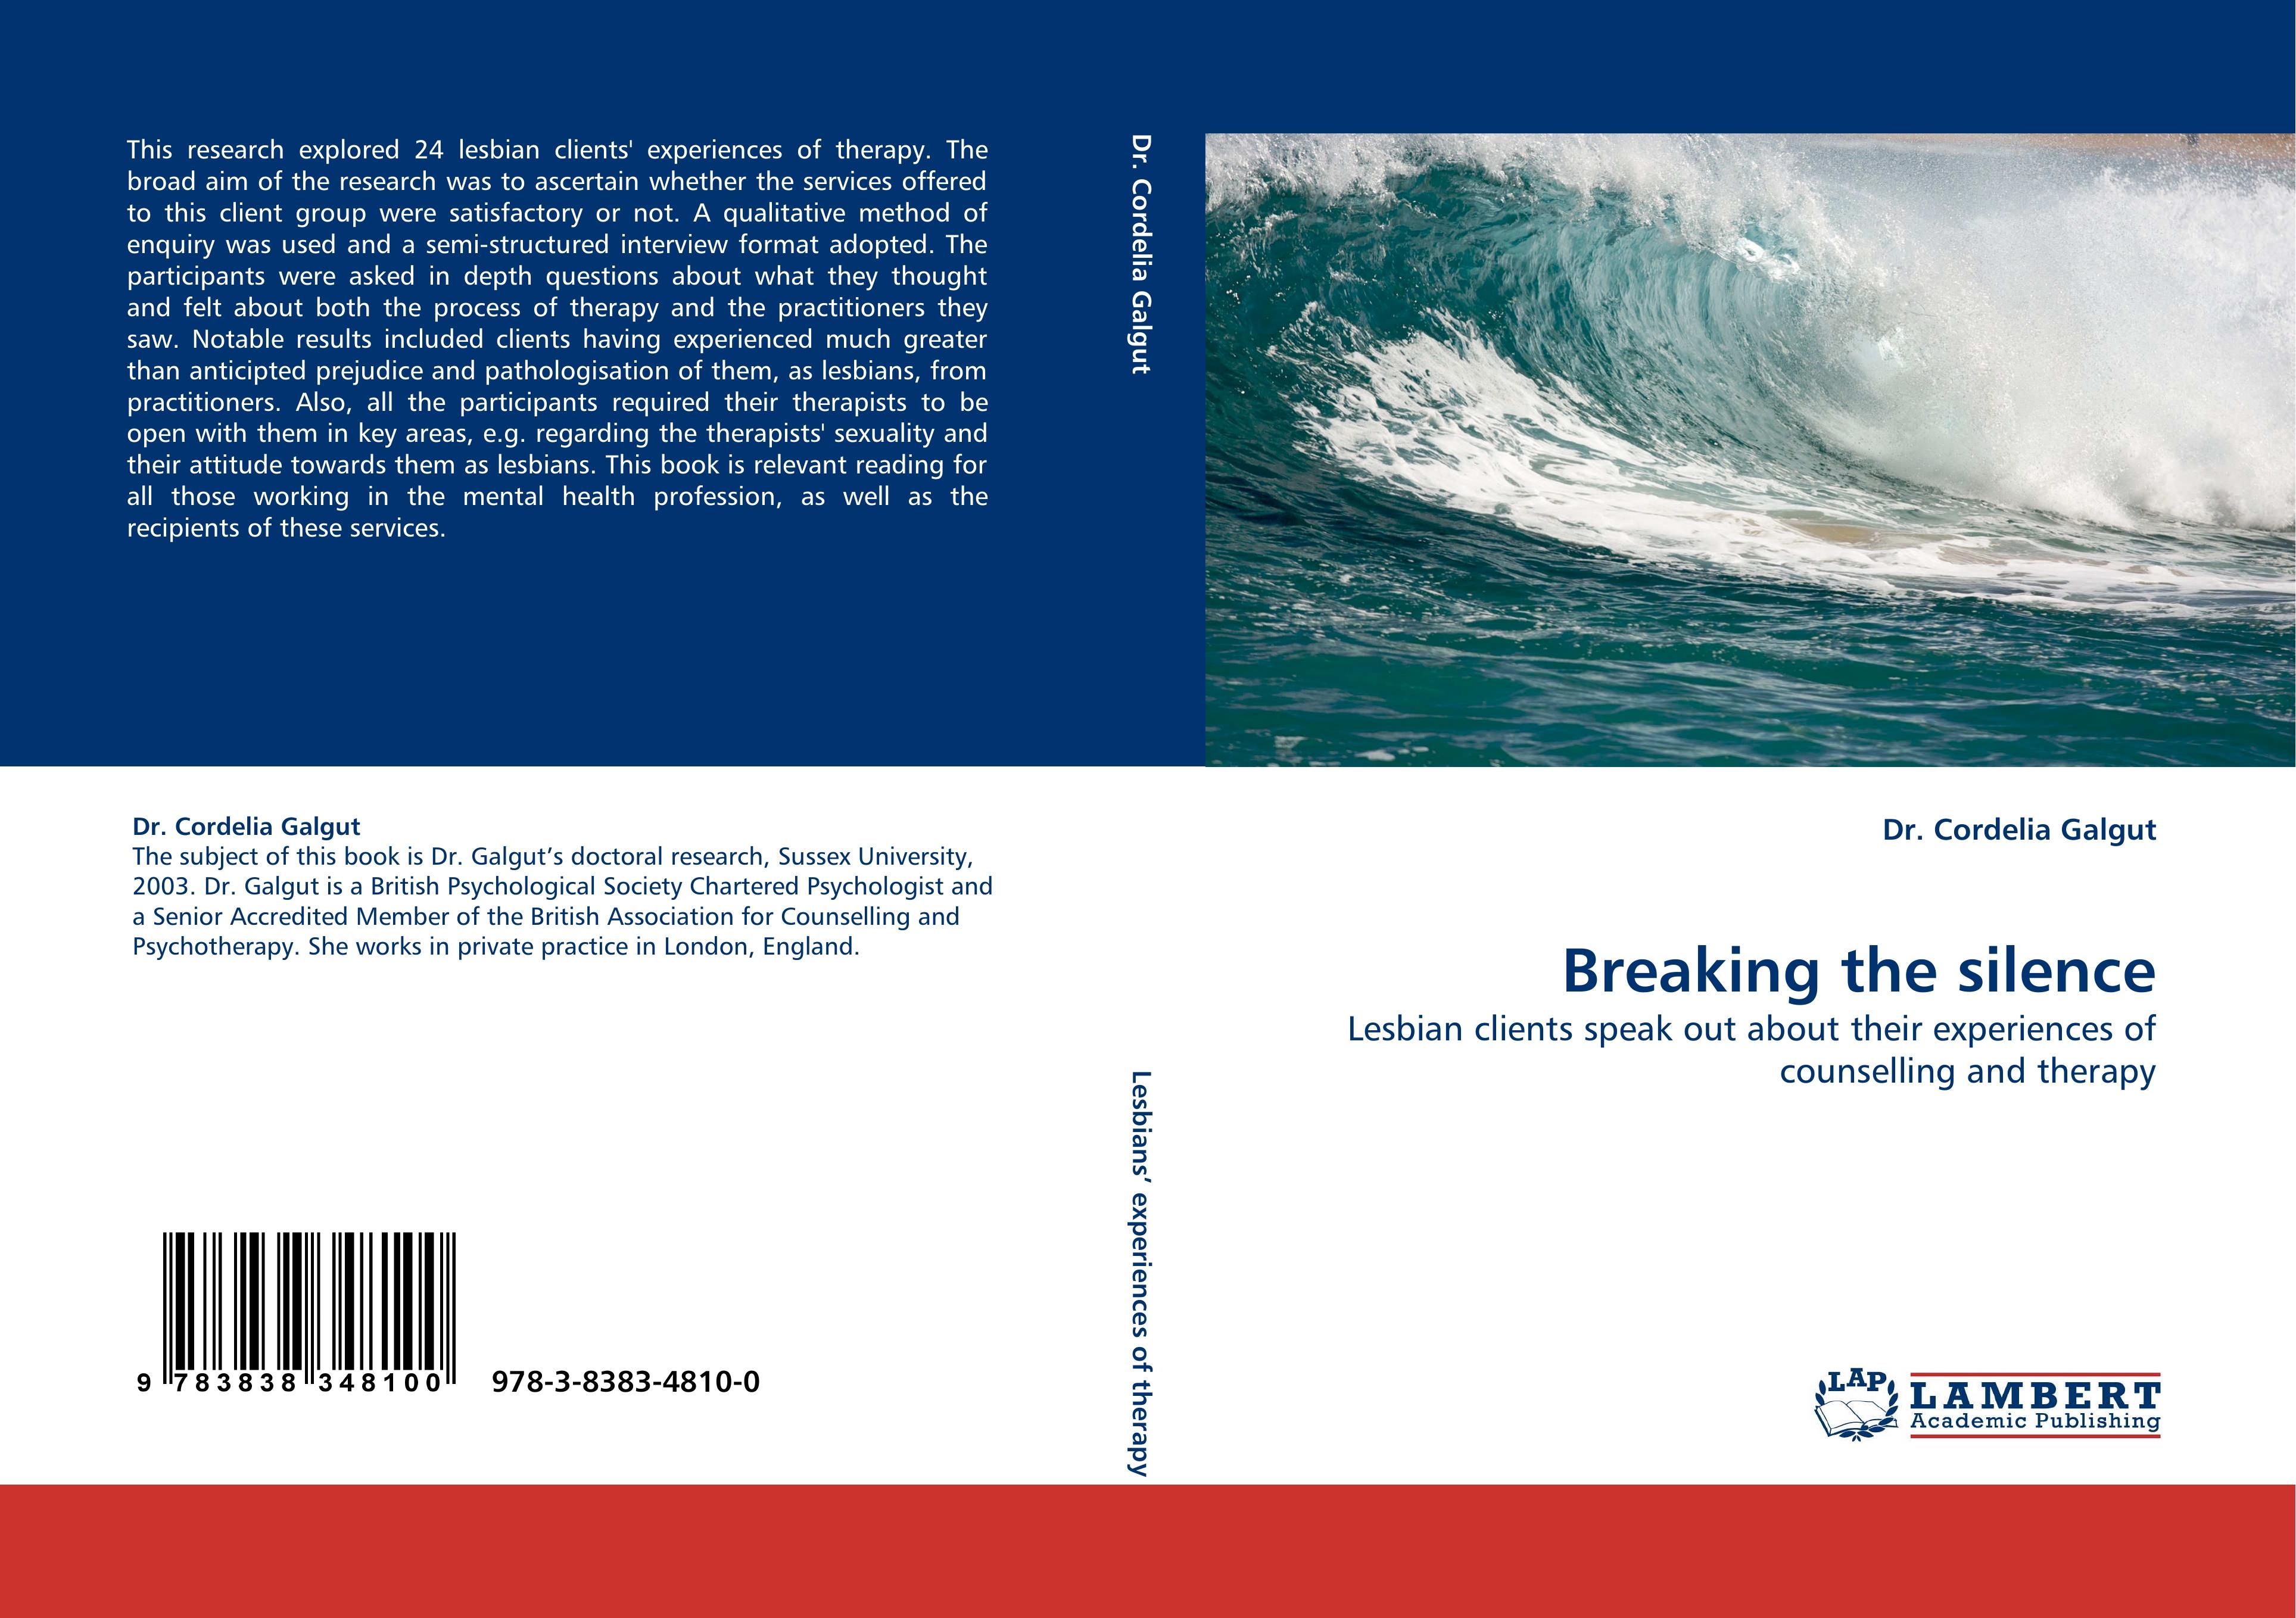 Breaking the silence | Lesbian clients speak out about their experiences of counselling and therapy | Cordelia Galgut | Taschenbuch | Paperback | 272 S. | Englisch | 2010 | EAN 9783838348100 - Galgut, Cordelia